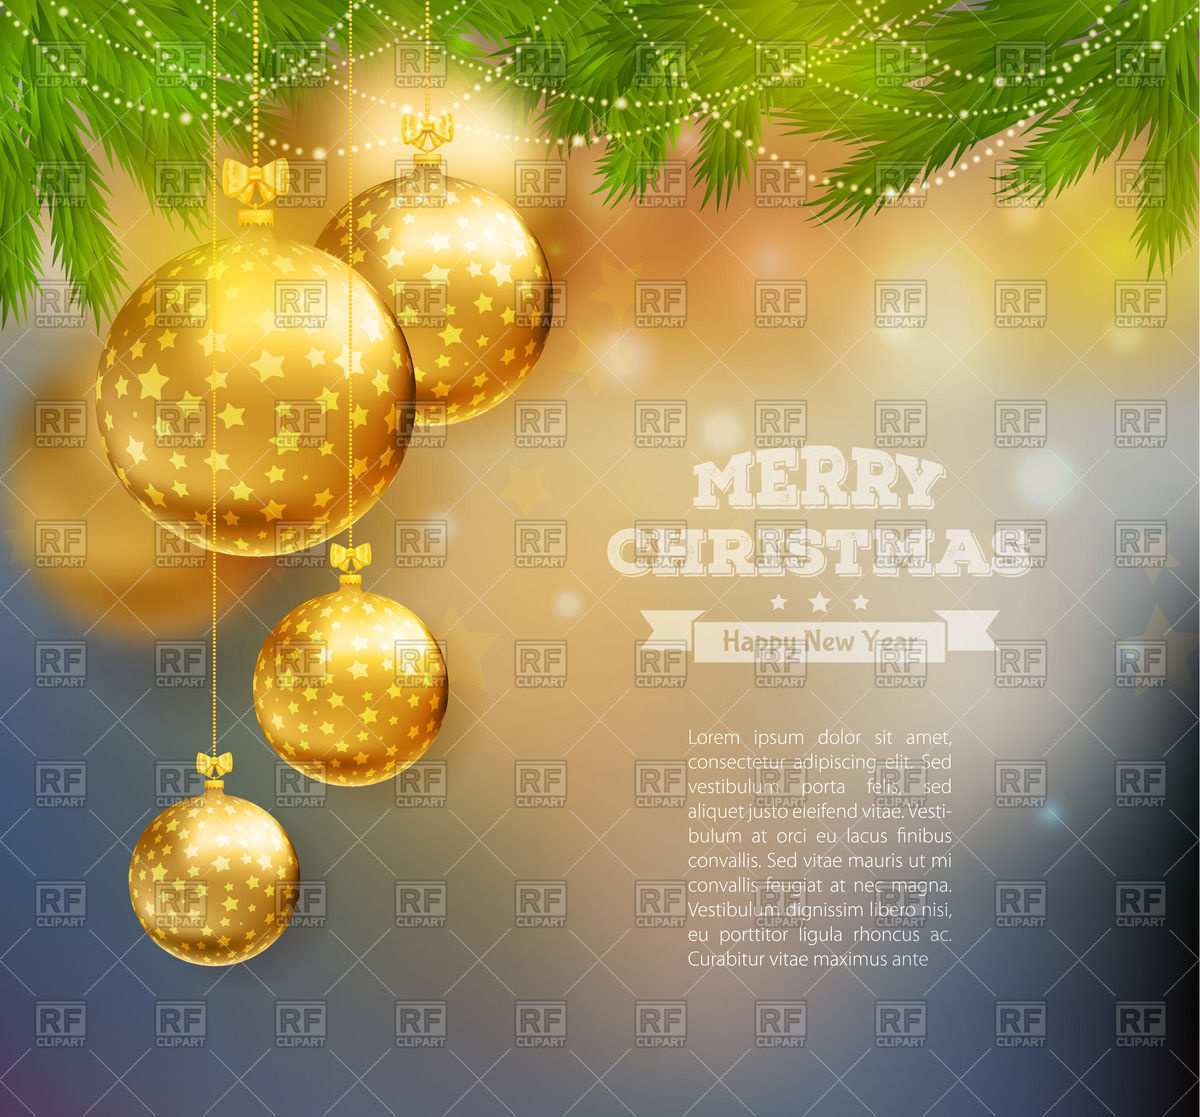 29 Blank Christmas Card Template Gold for Ms Word by Christmas Card Template Gold